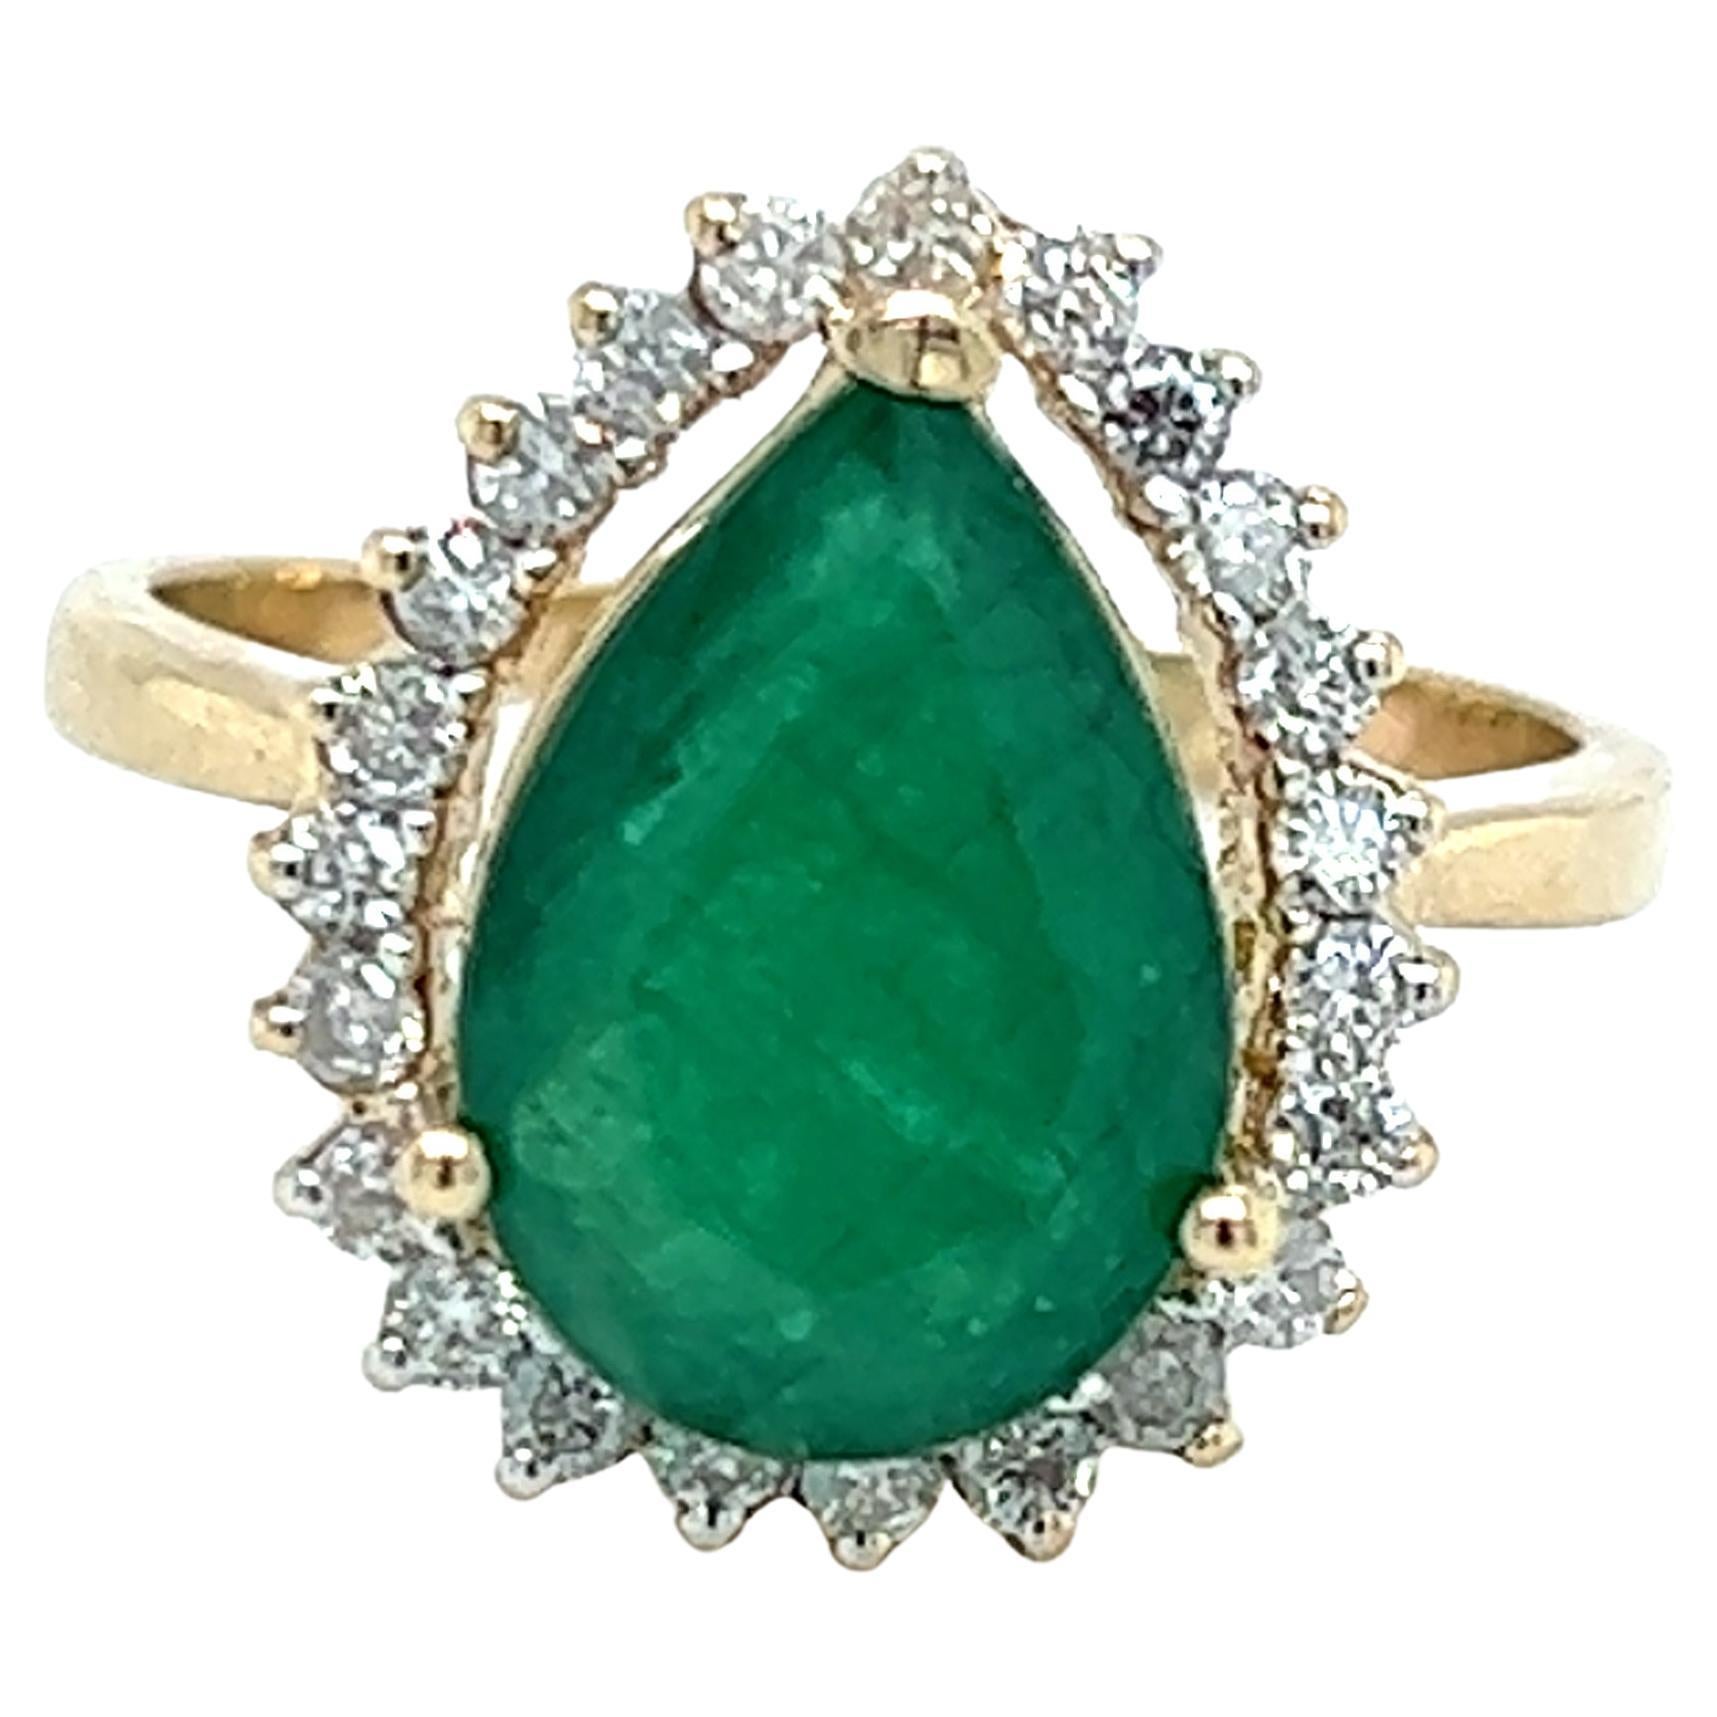 Contemporary Pear Shaped Emerald Diamond Halo Ring in 14K Yellow Gold